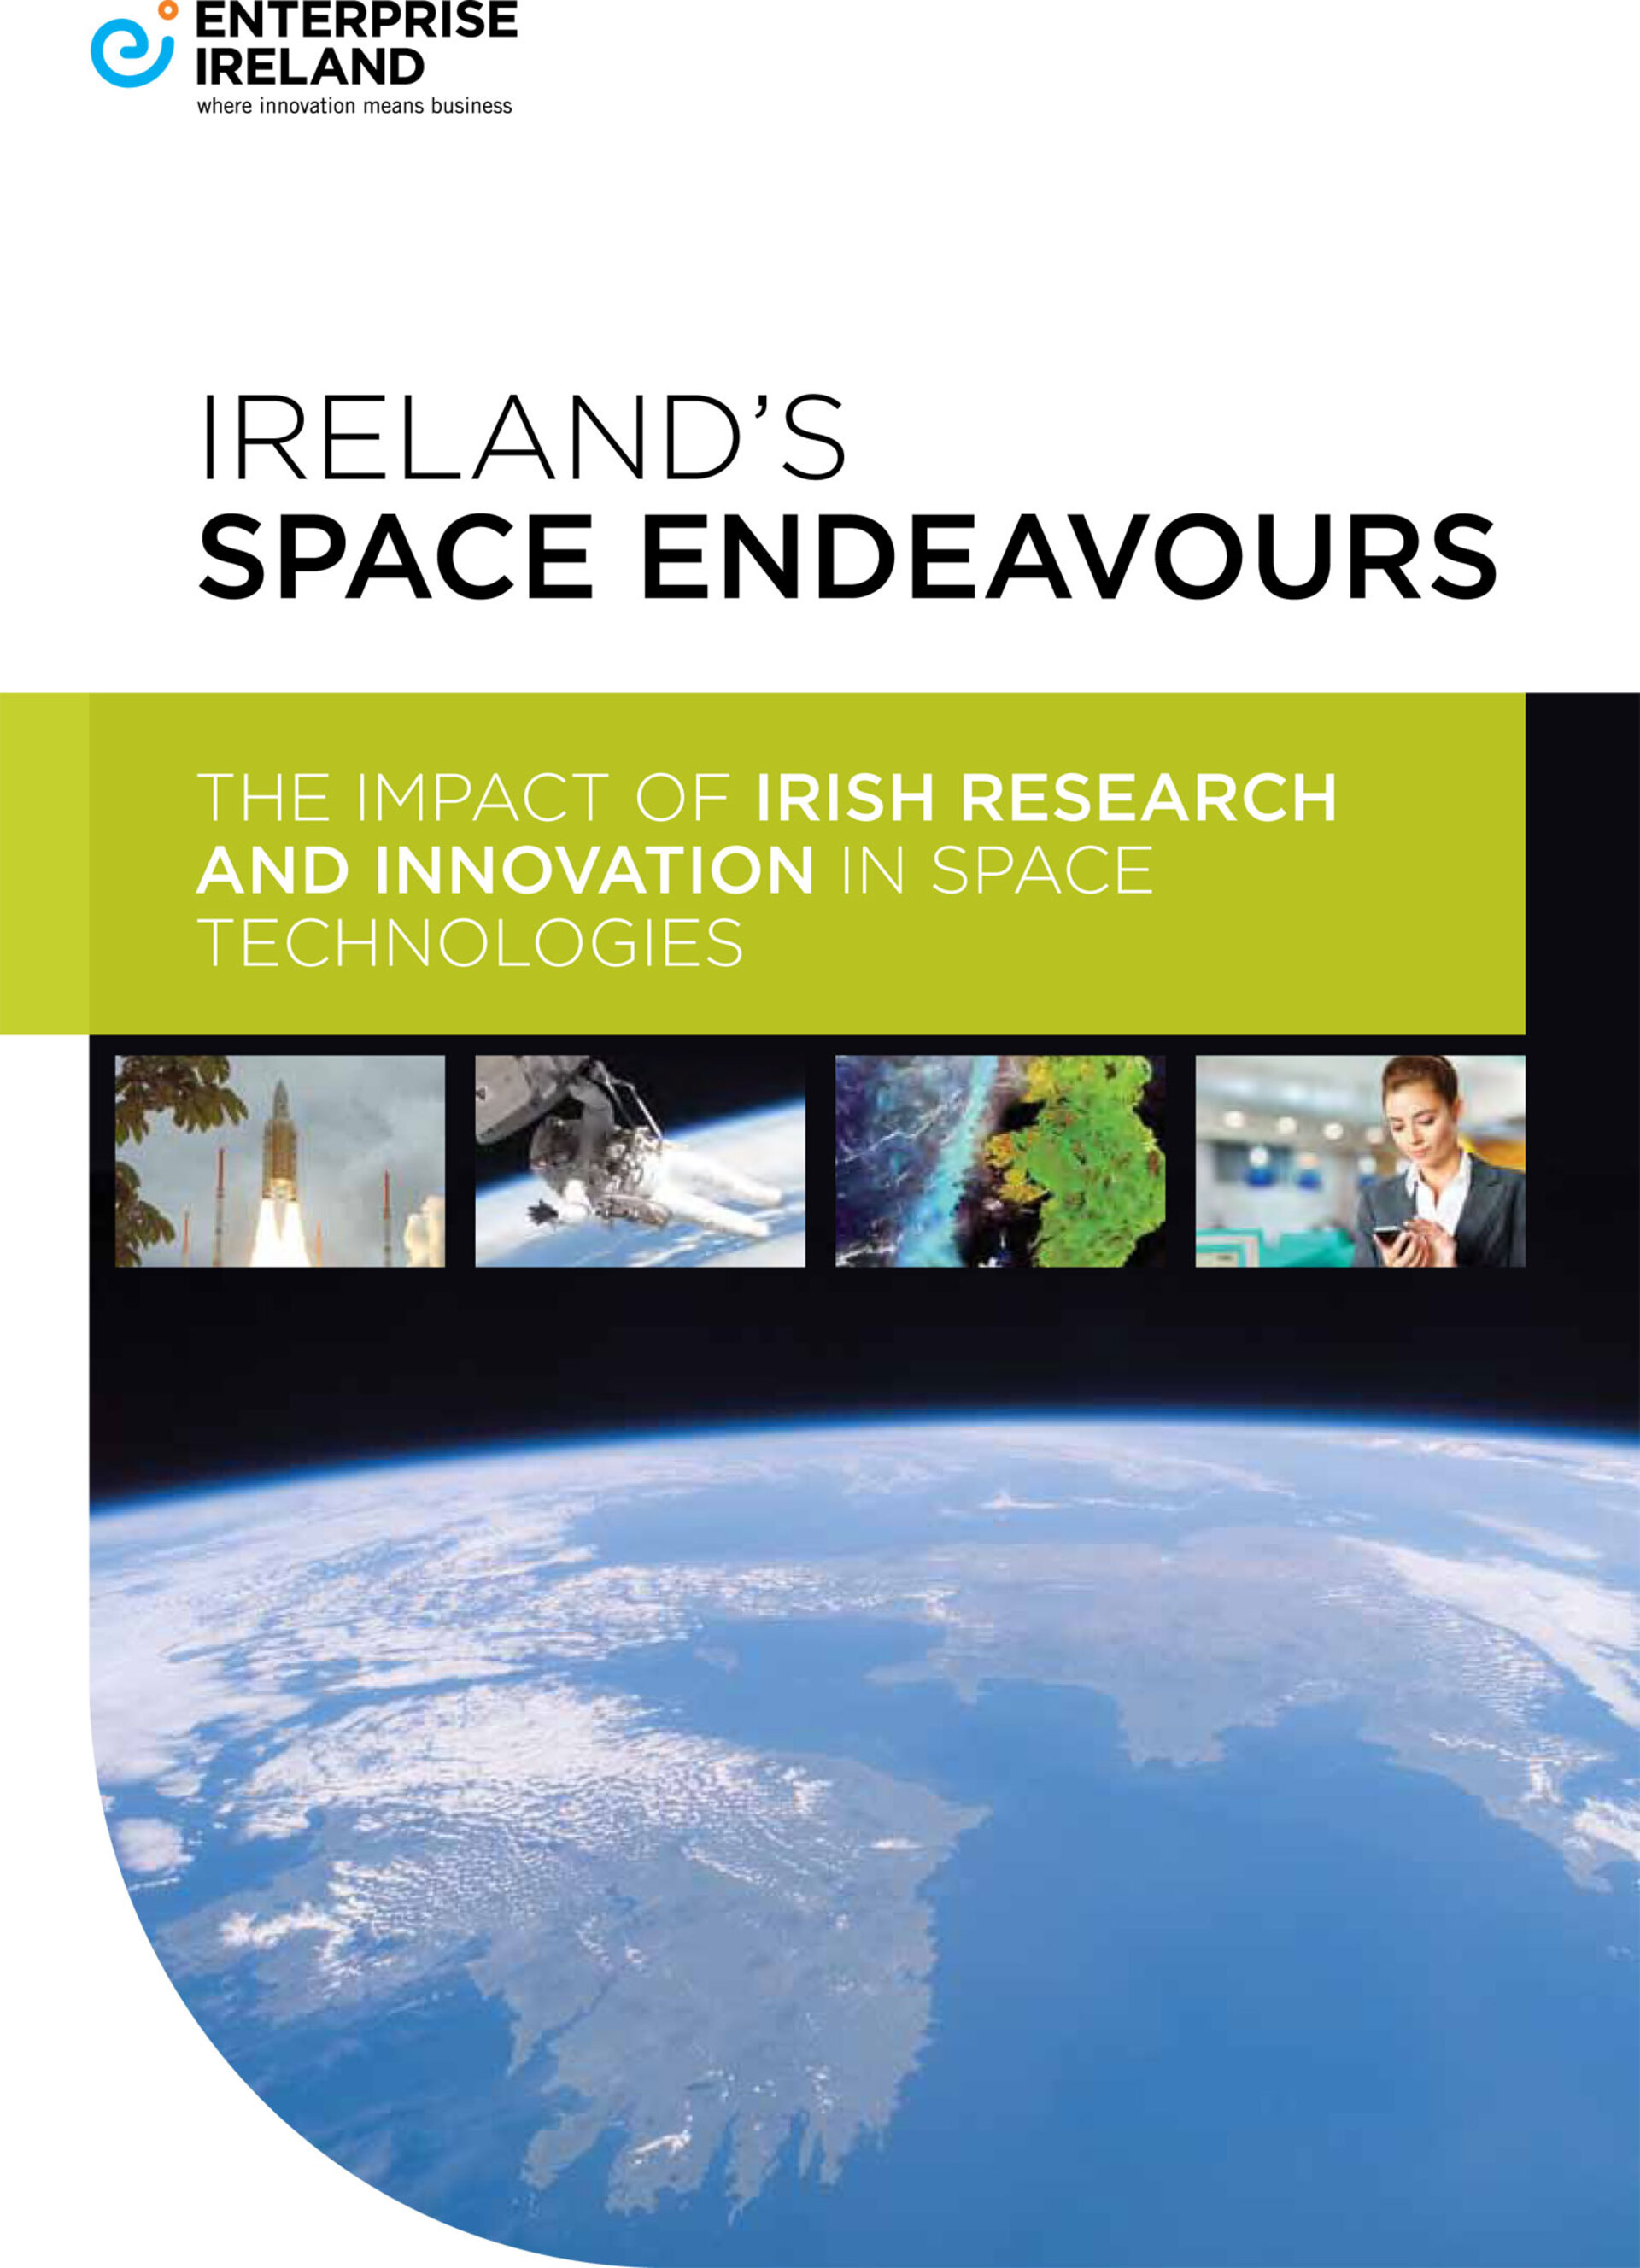 Ireland's Space Endeavours